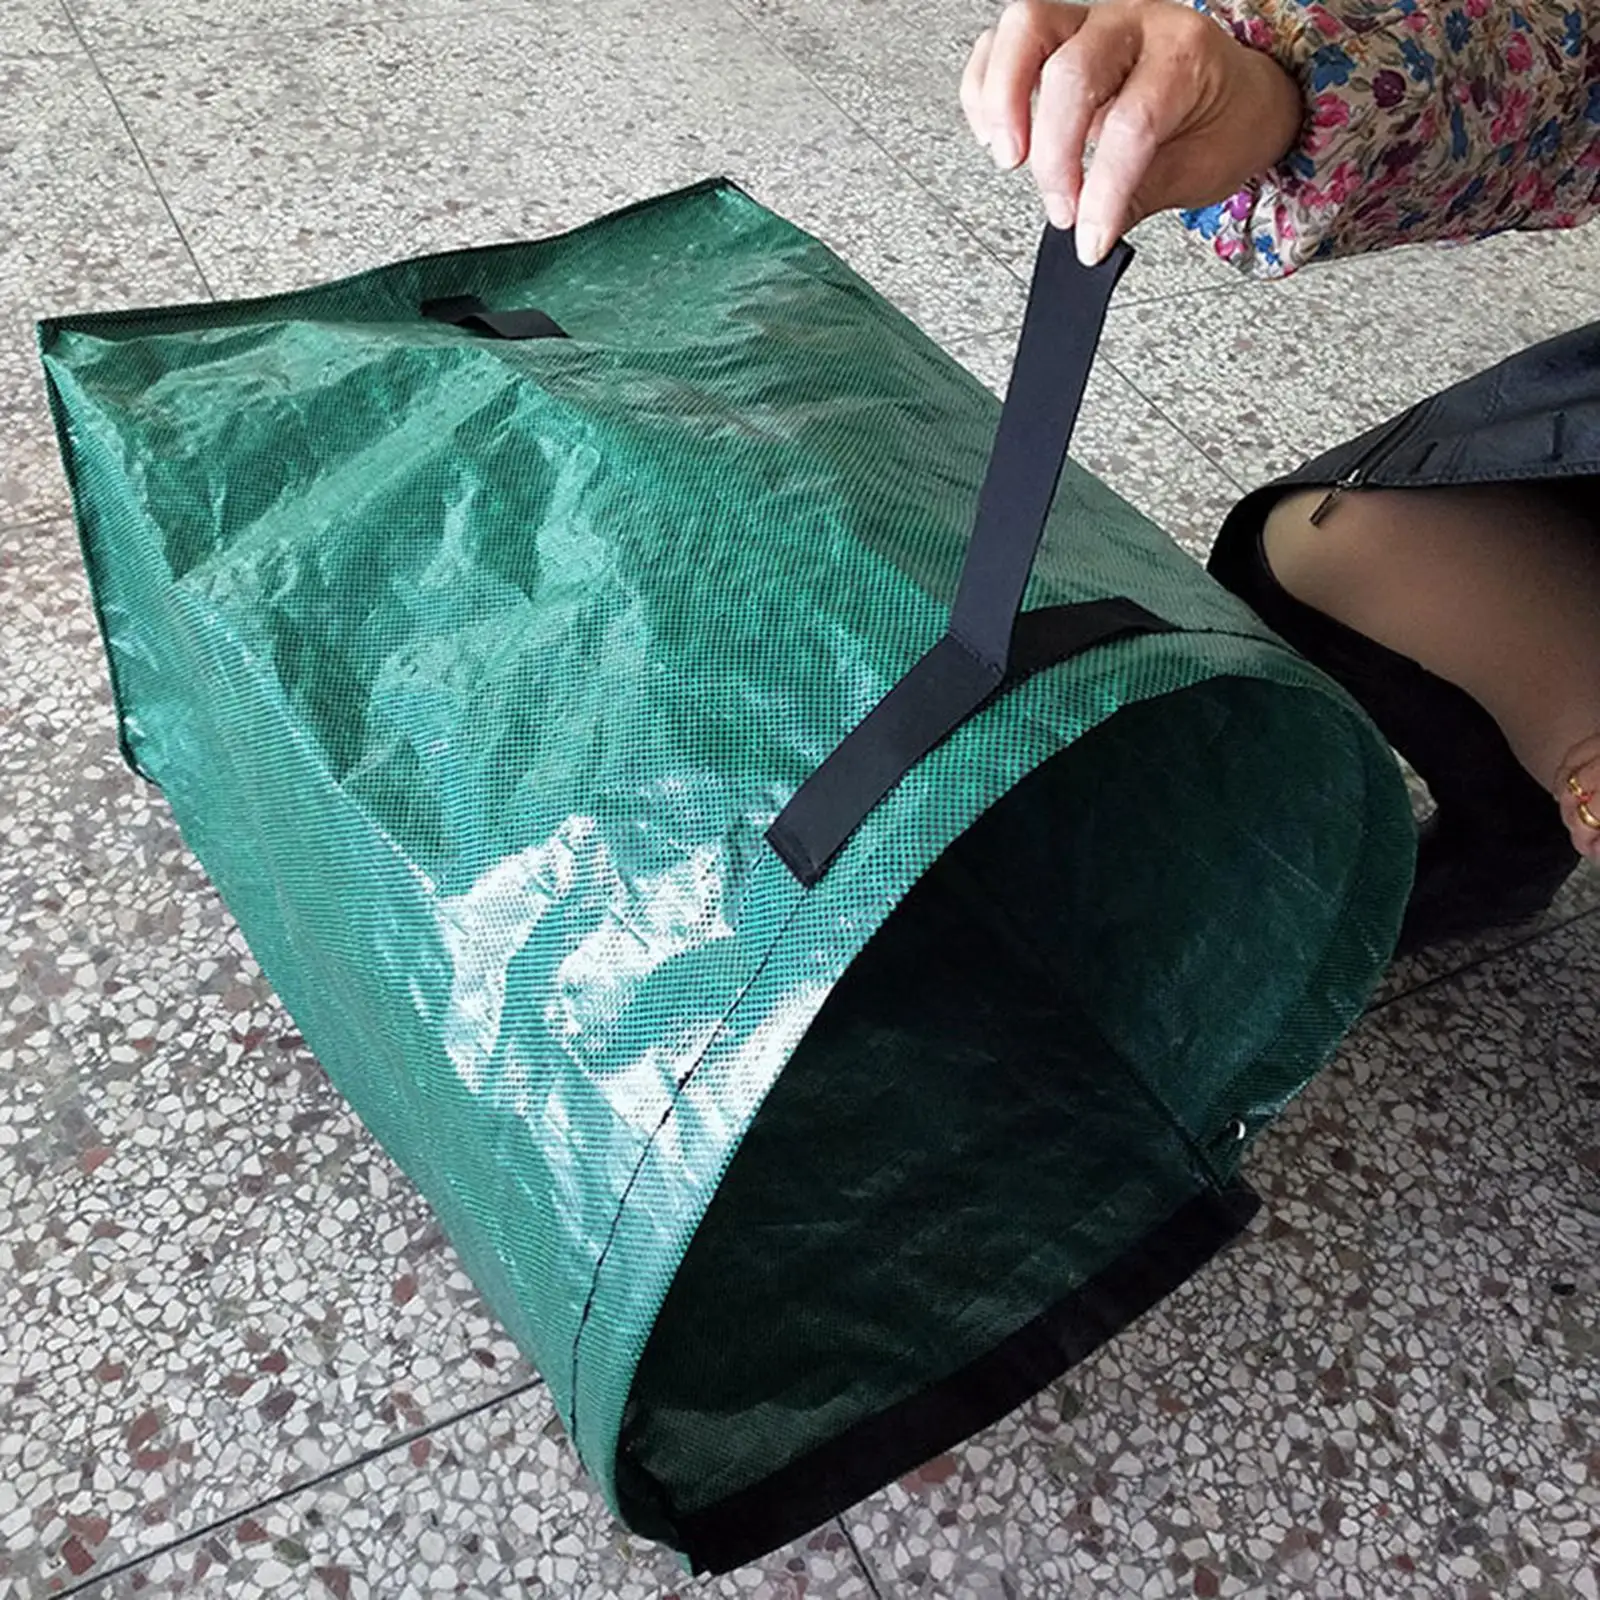 Garden Leaves Bag 53 gallons Storage Bag Leaf Collection Bag Heavy Duty Collection Container Composte Bag for Outdoor Patio